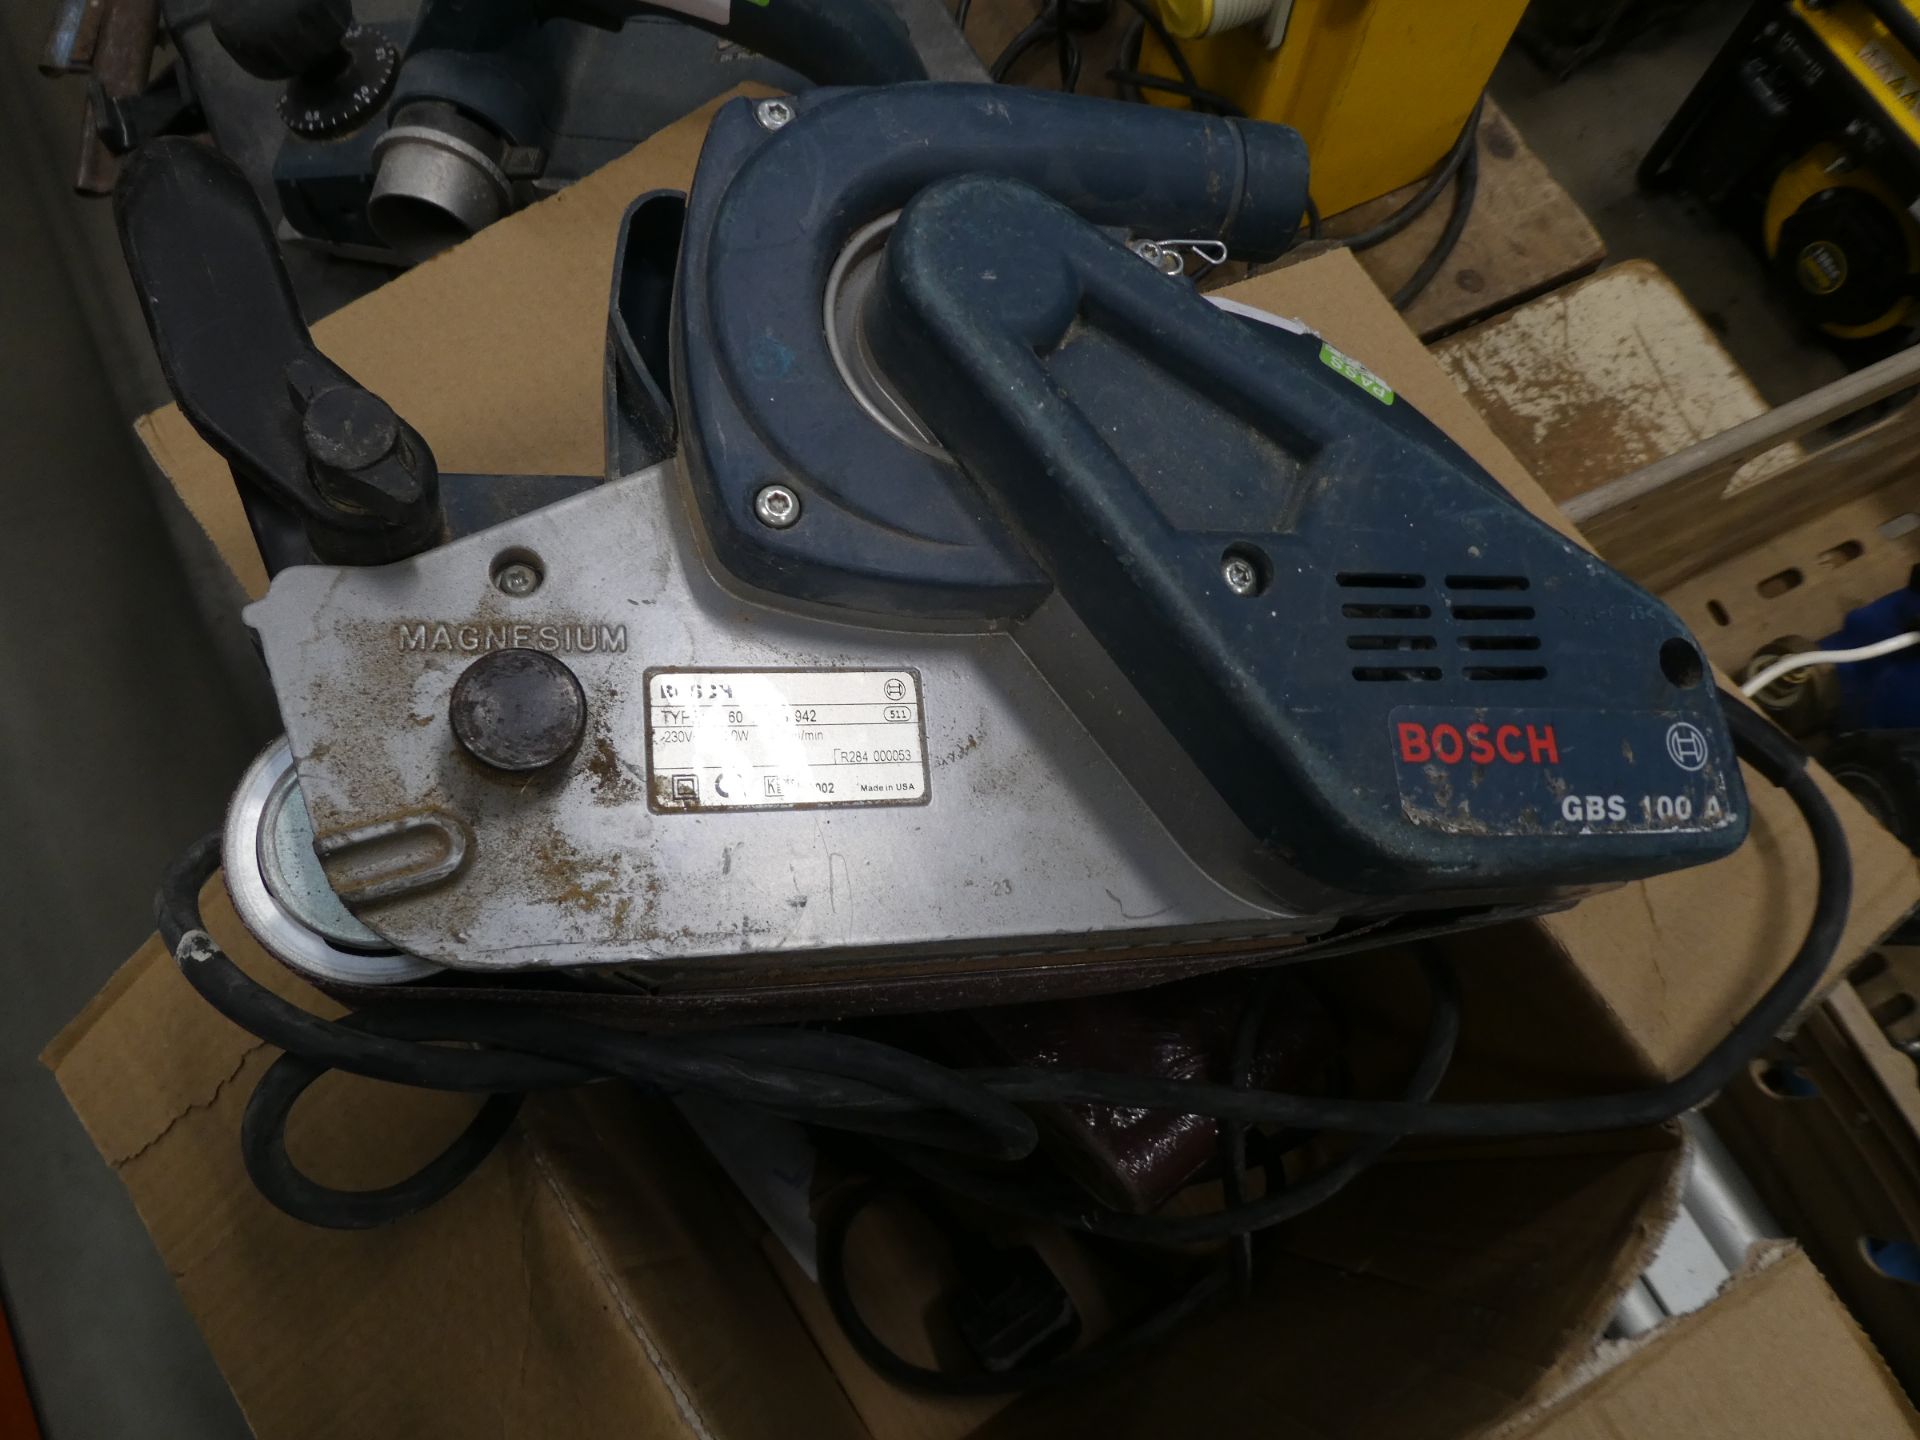 Box containing Bosch sander and electric plane - Image 2 of 2